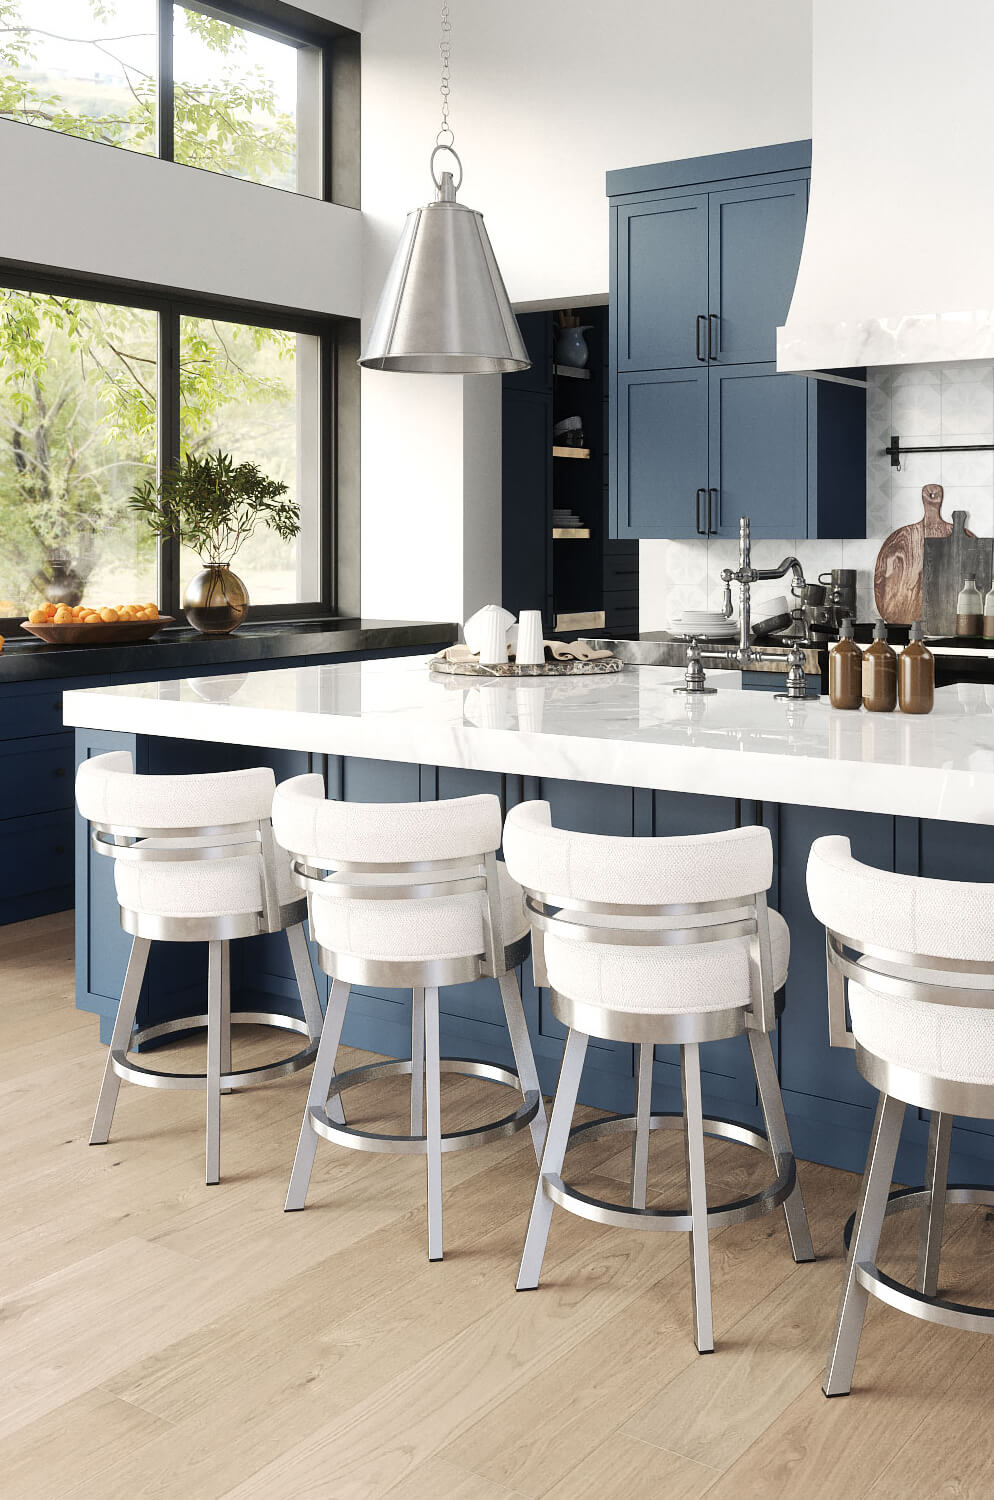 Wesley Allen's Miramar Brushed Stainless Swivel Barstools with Low Back in Blue and White Kitchen